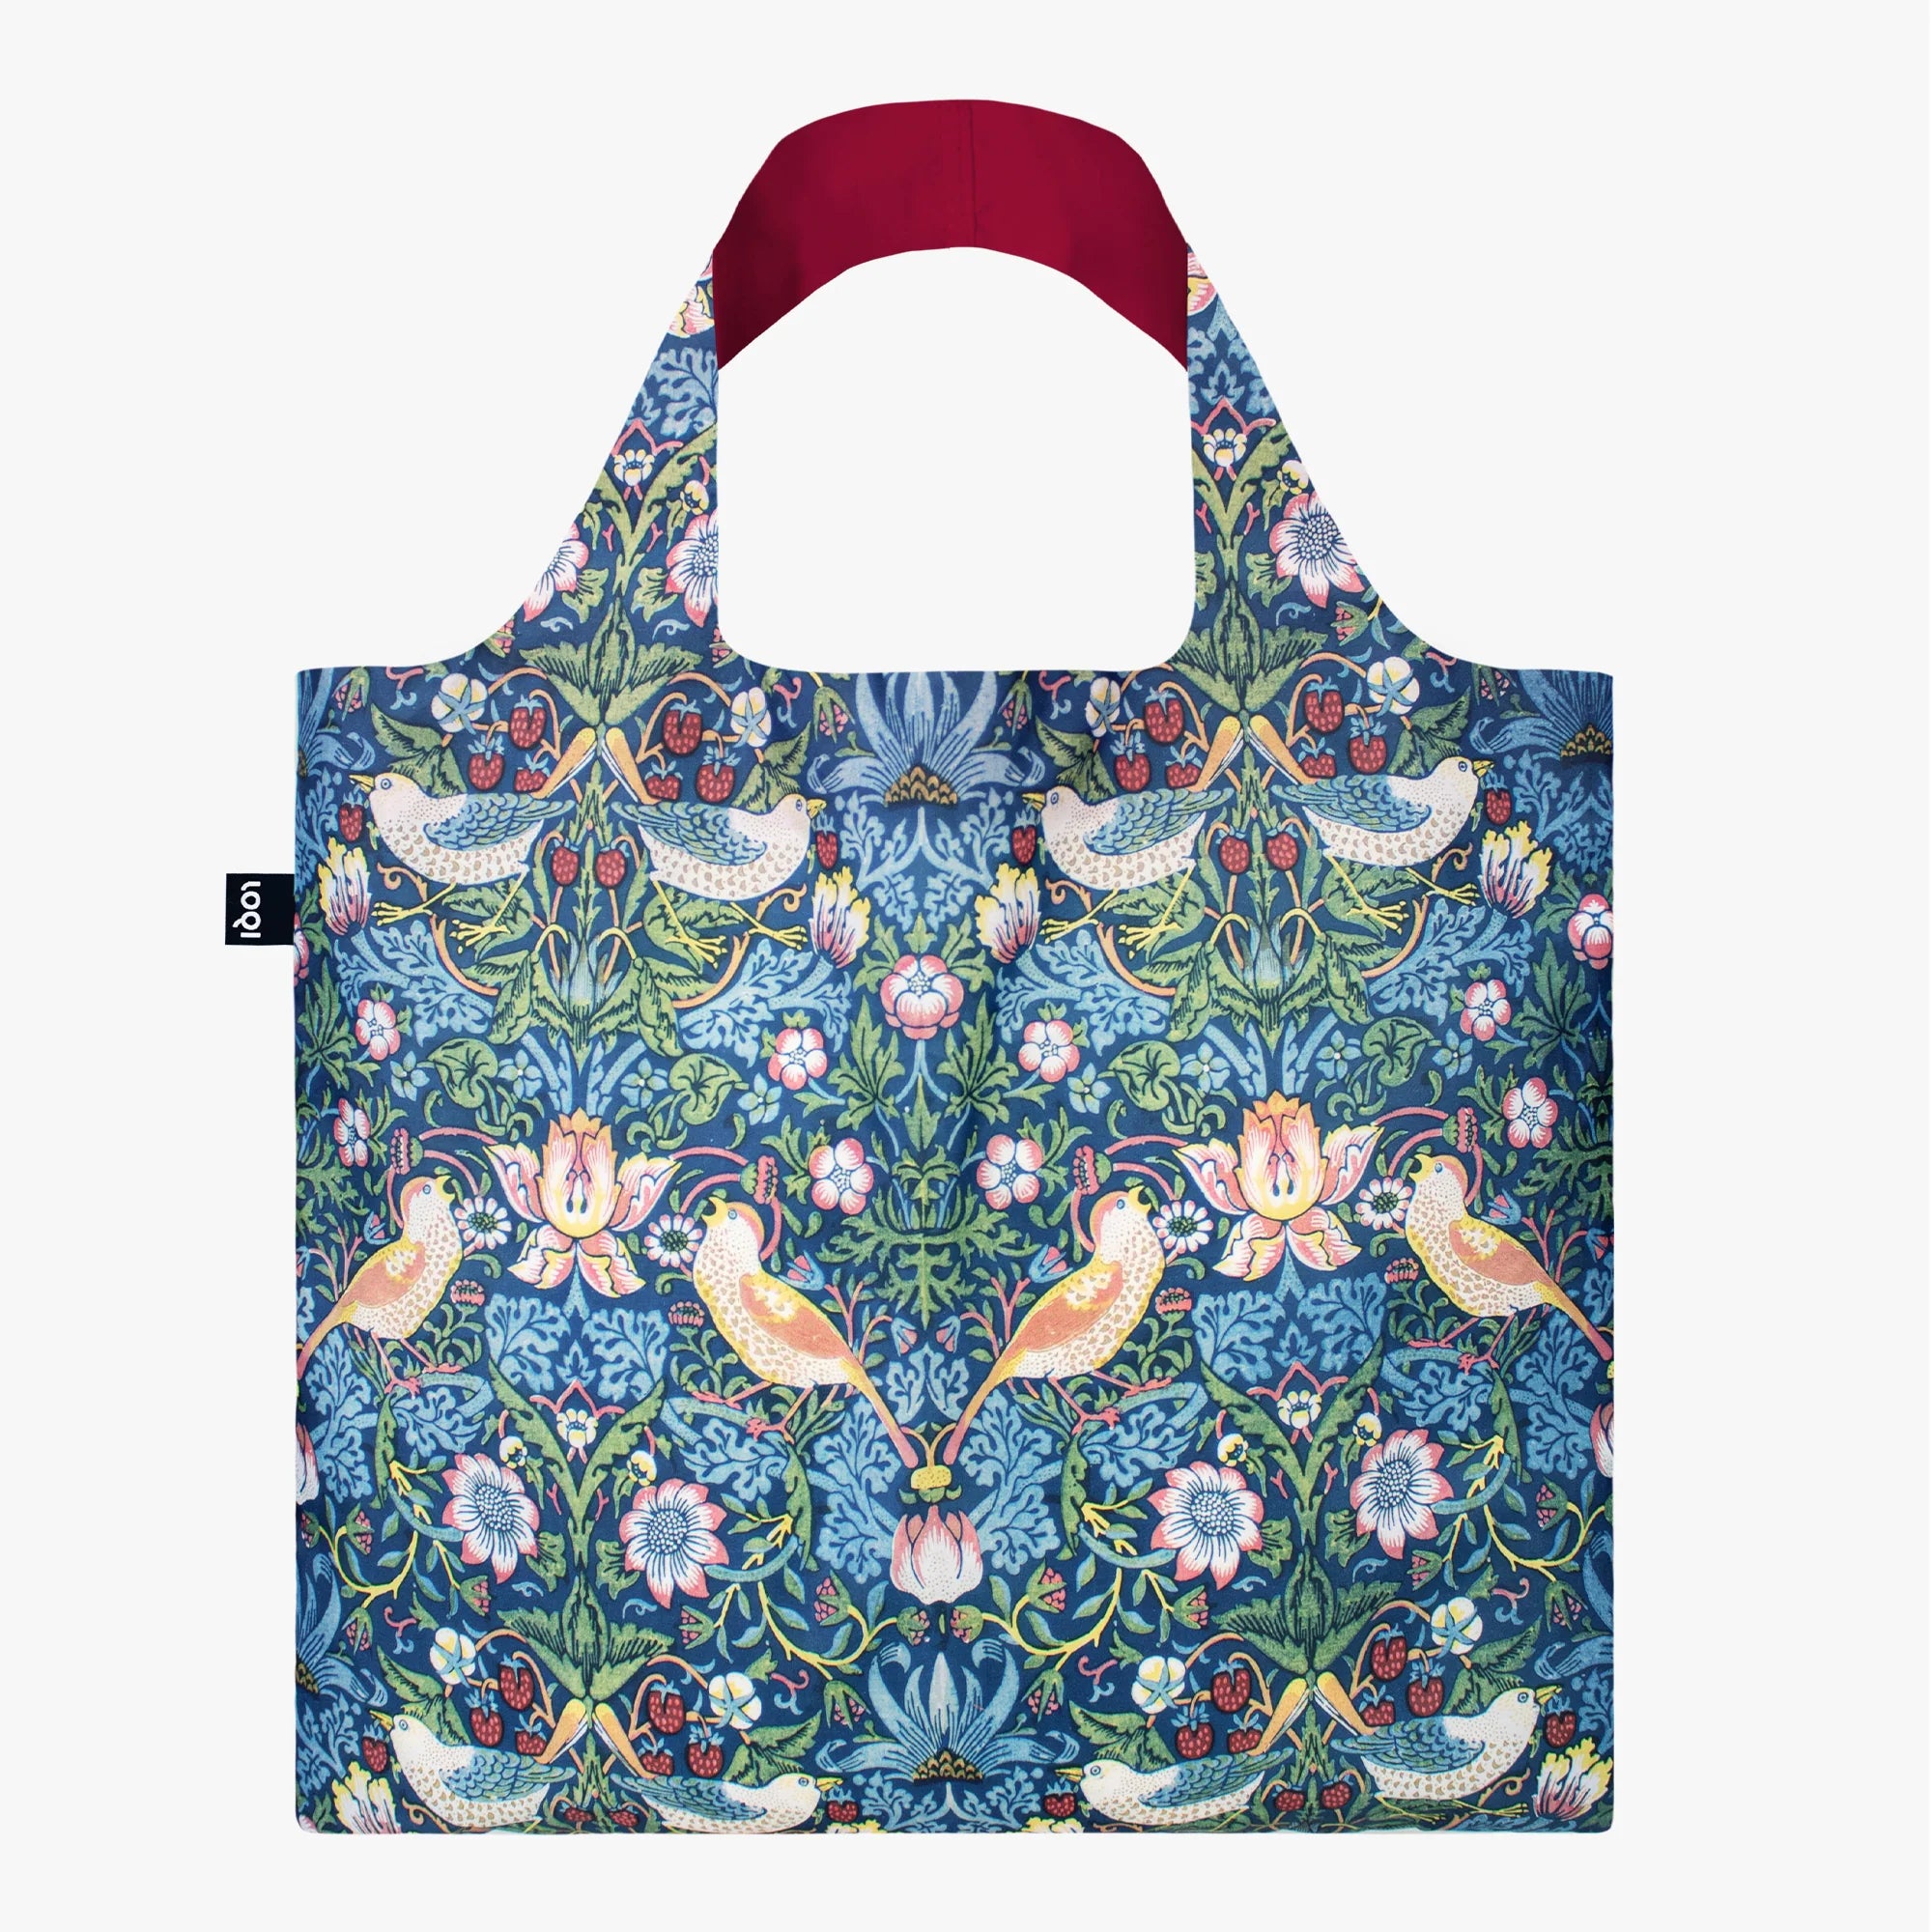 Sustainable Living Loqi William Morris Strawberry Recycled Bag by Weirs of Baggot Street